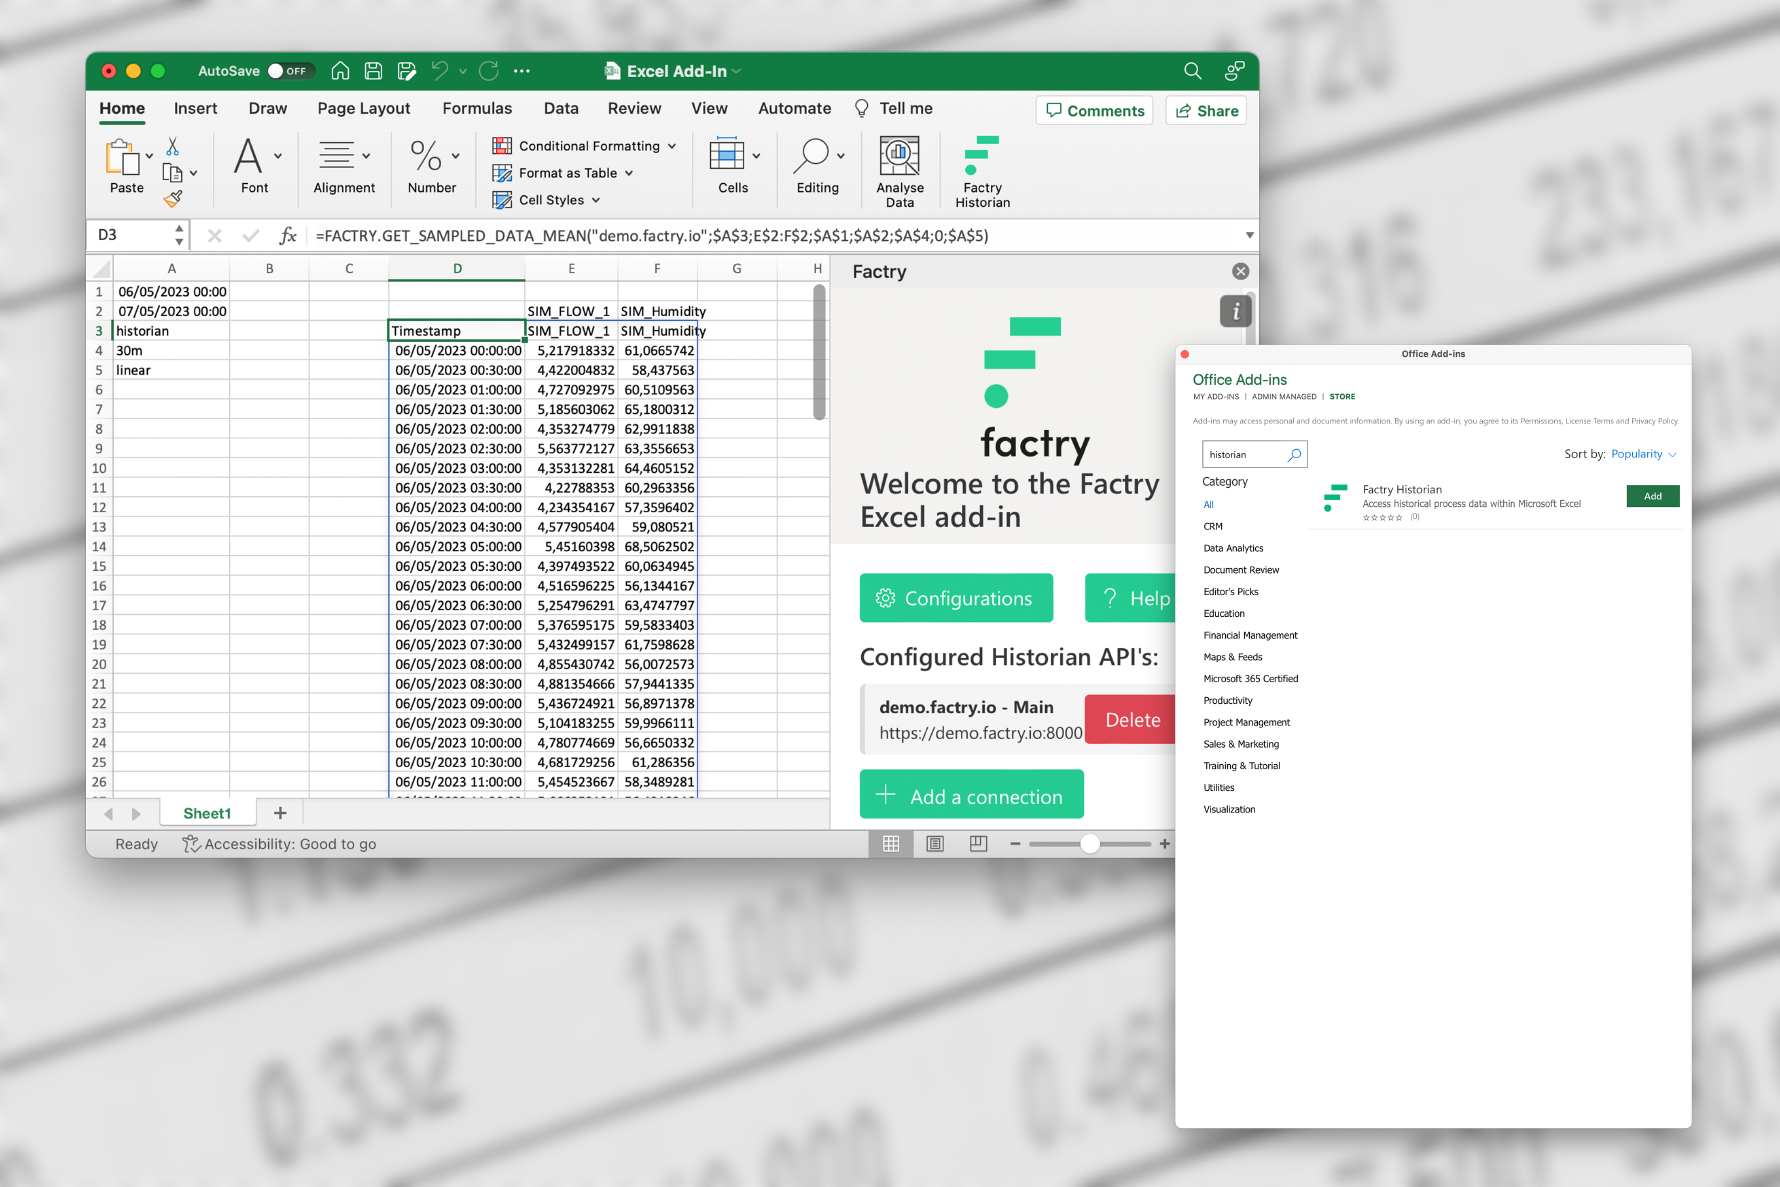 The Excel add-in